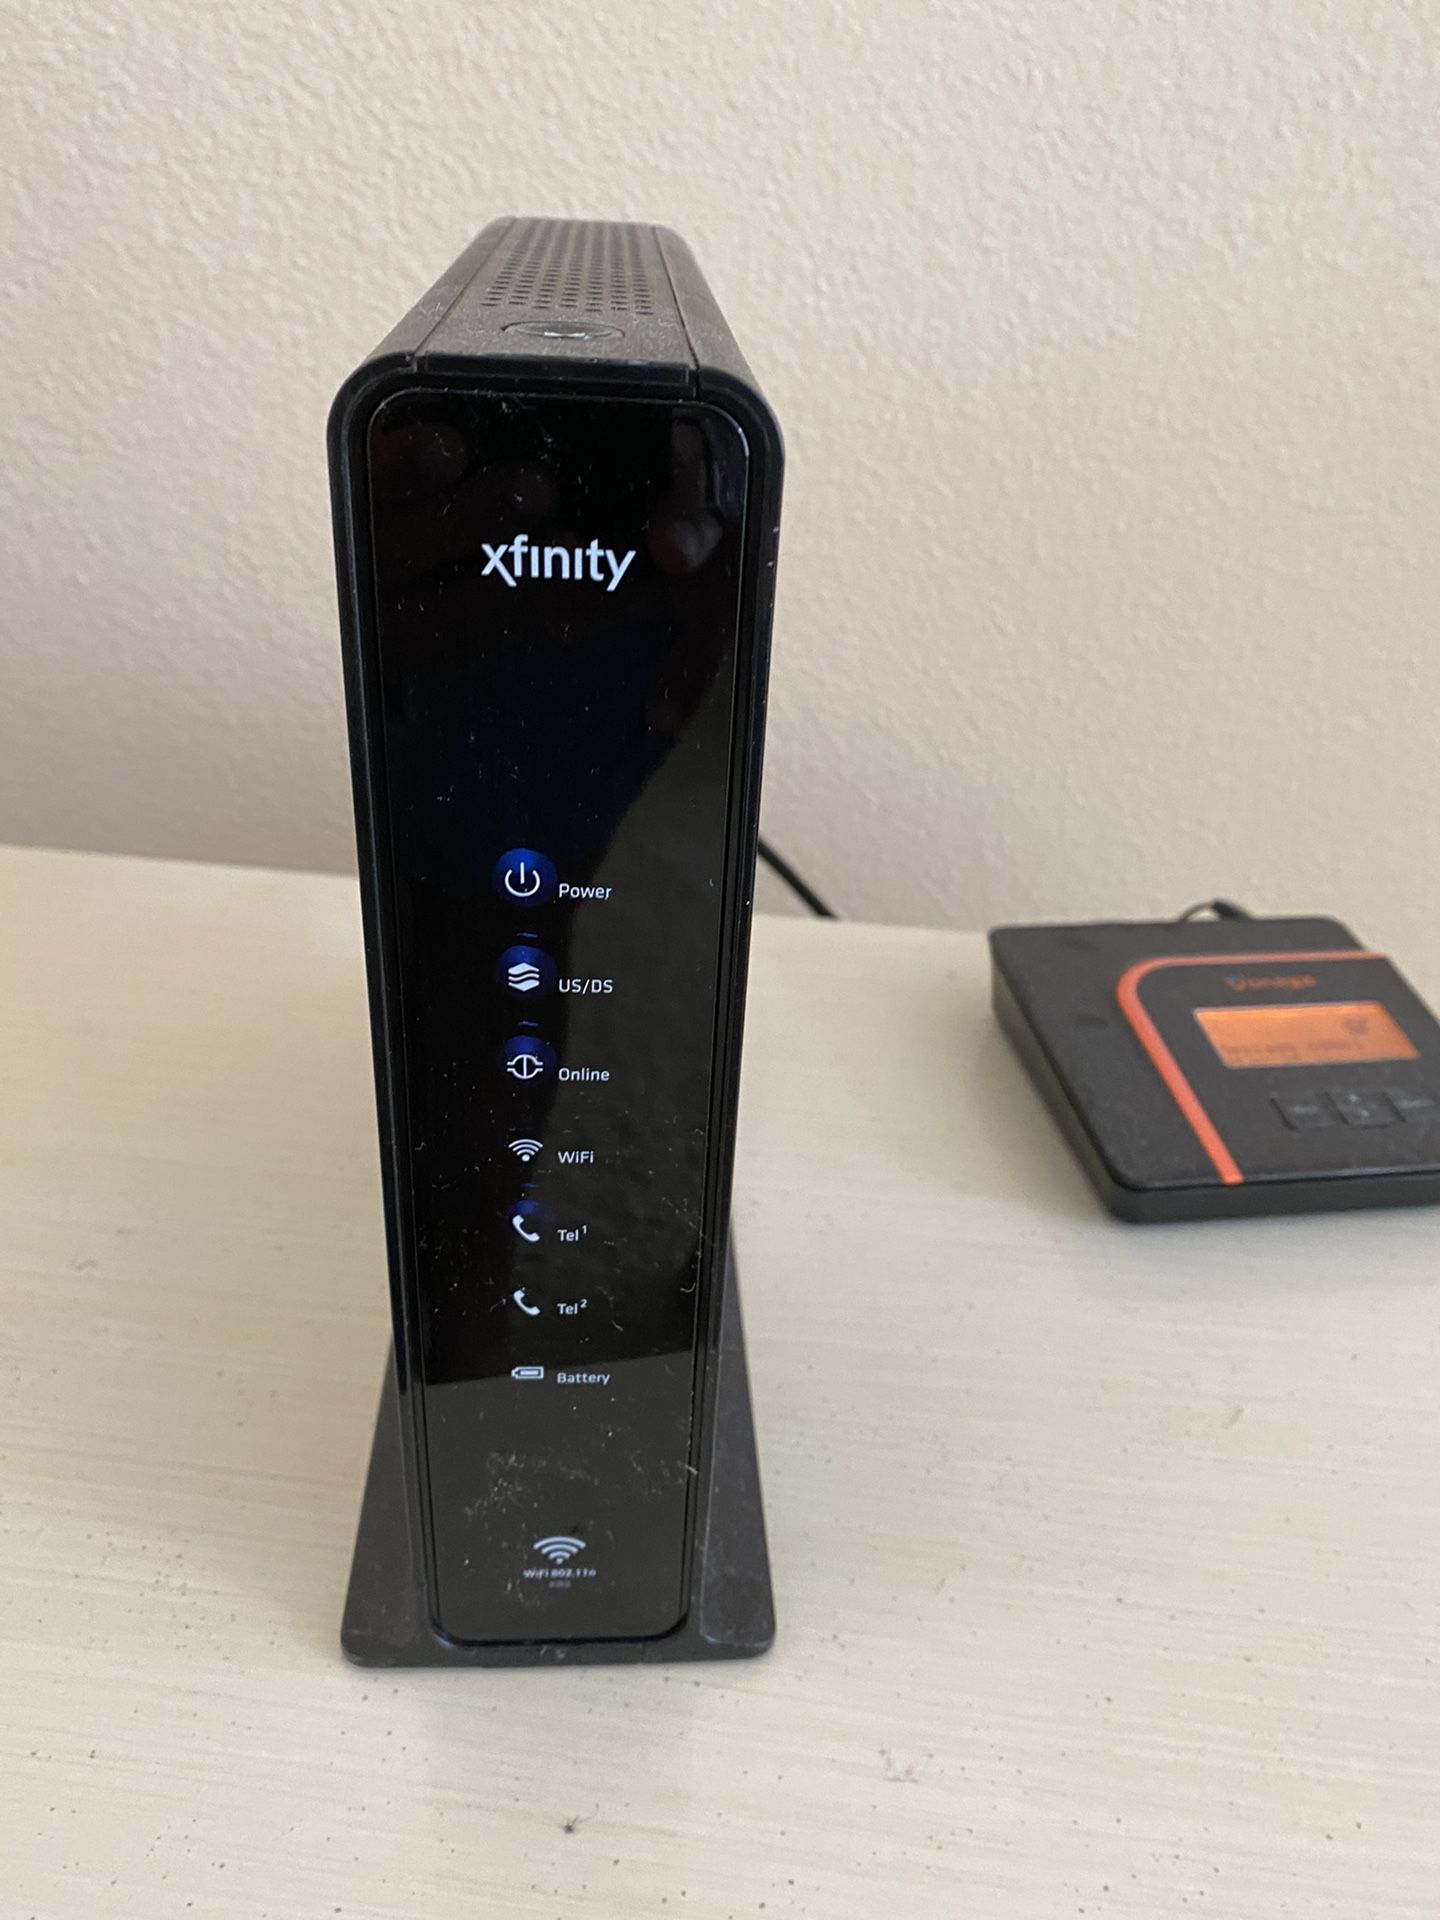 CABLE MODEM XFINITY ARRIS Touchstone DOCSIS 3.0 Cable MODEM ABOUT about 4 yrs old... PERFECT, I OWN AND USE NIW